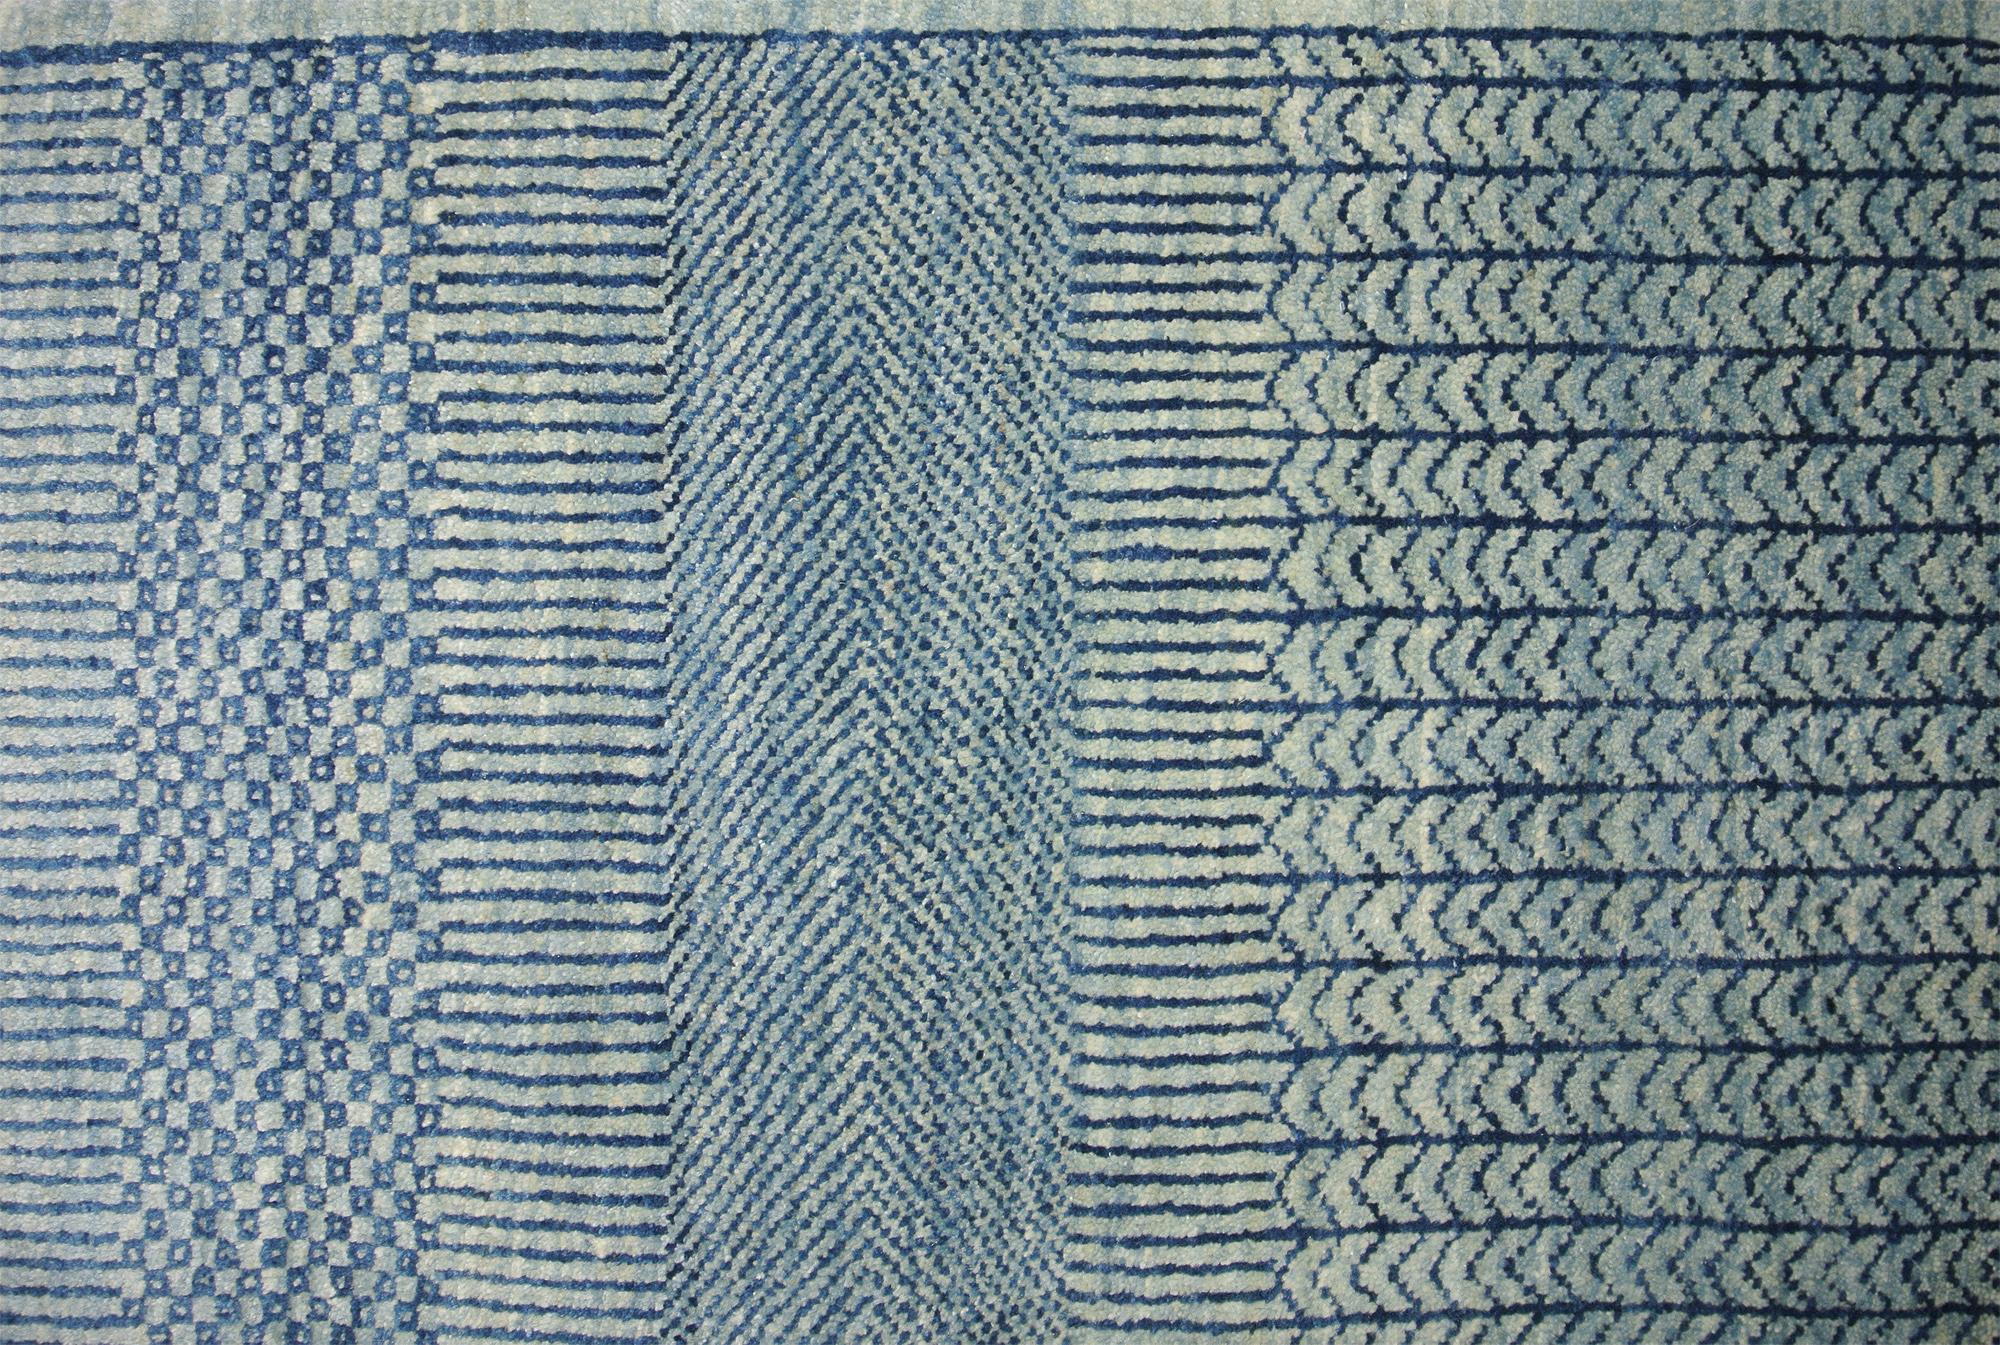 Contemporary Persian Rug, Indigo, Hand-knotted Wool, Orley Shabahang, 5' x 7' In New Condition For Sale In New York, NY